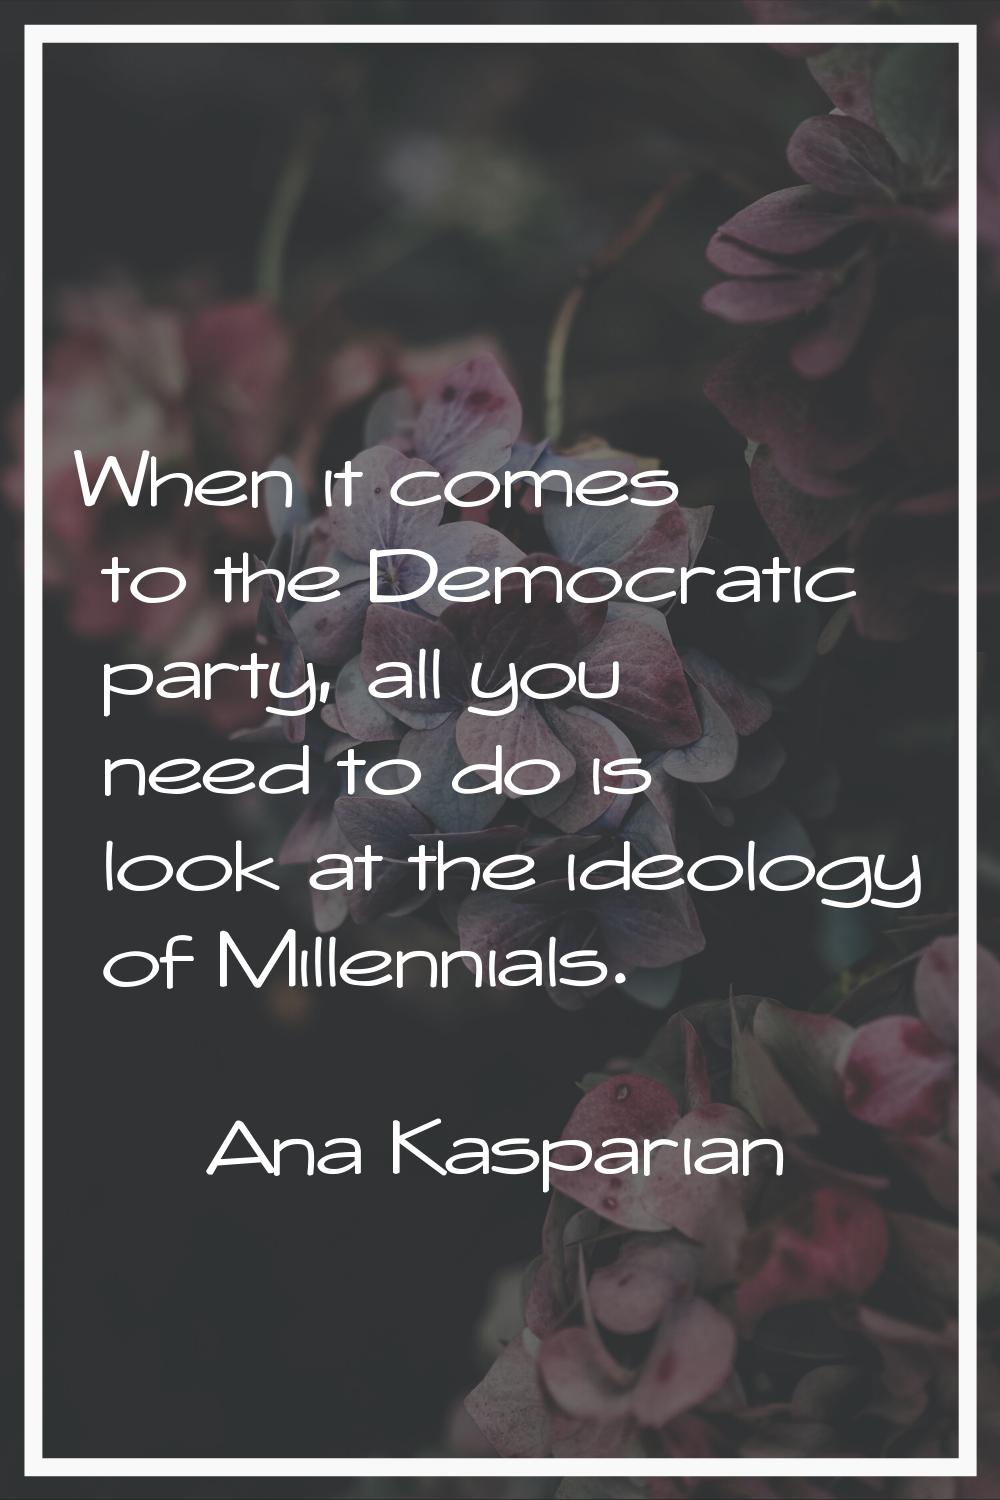 When it comes to the Democratic party, all you need to do is look at the ideology of Millennials.